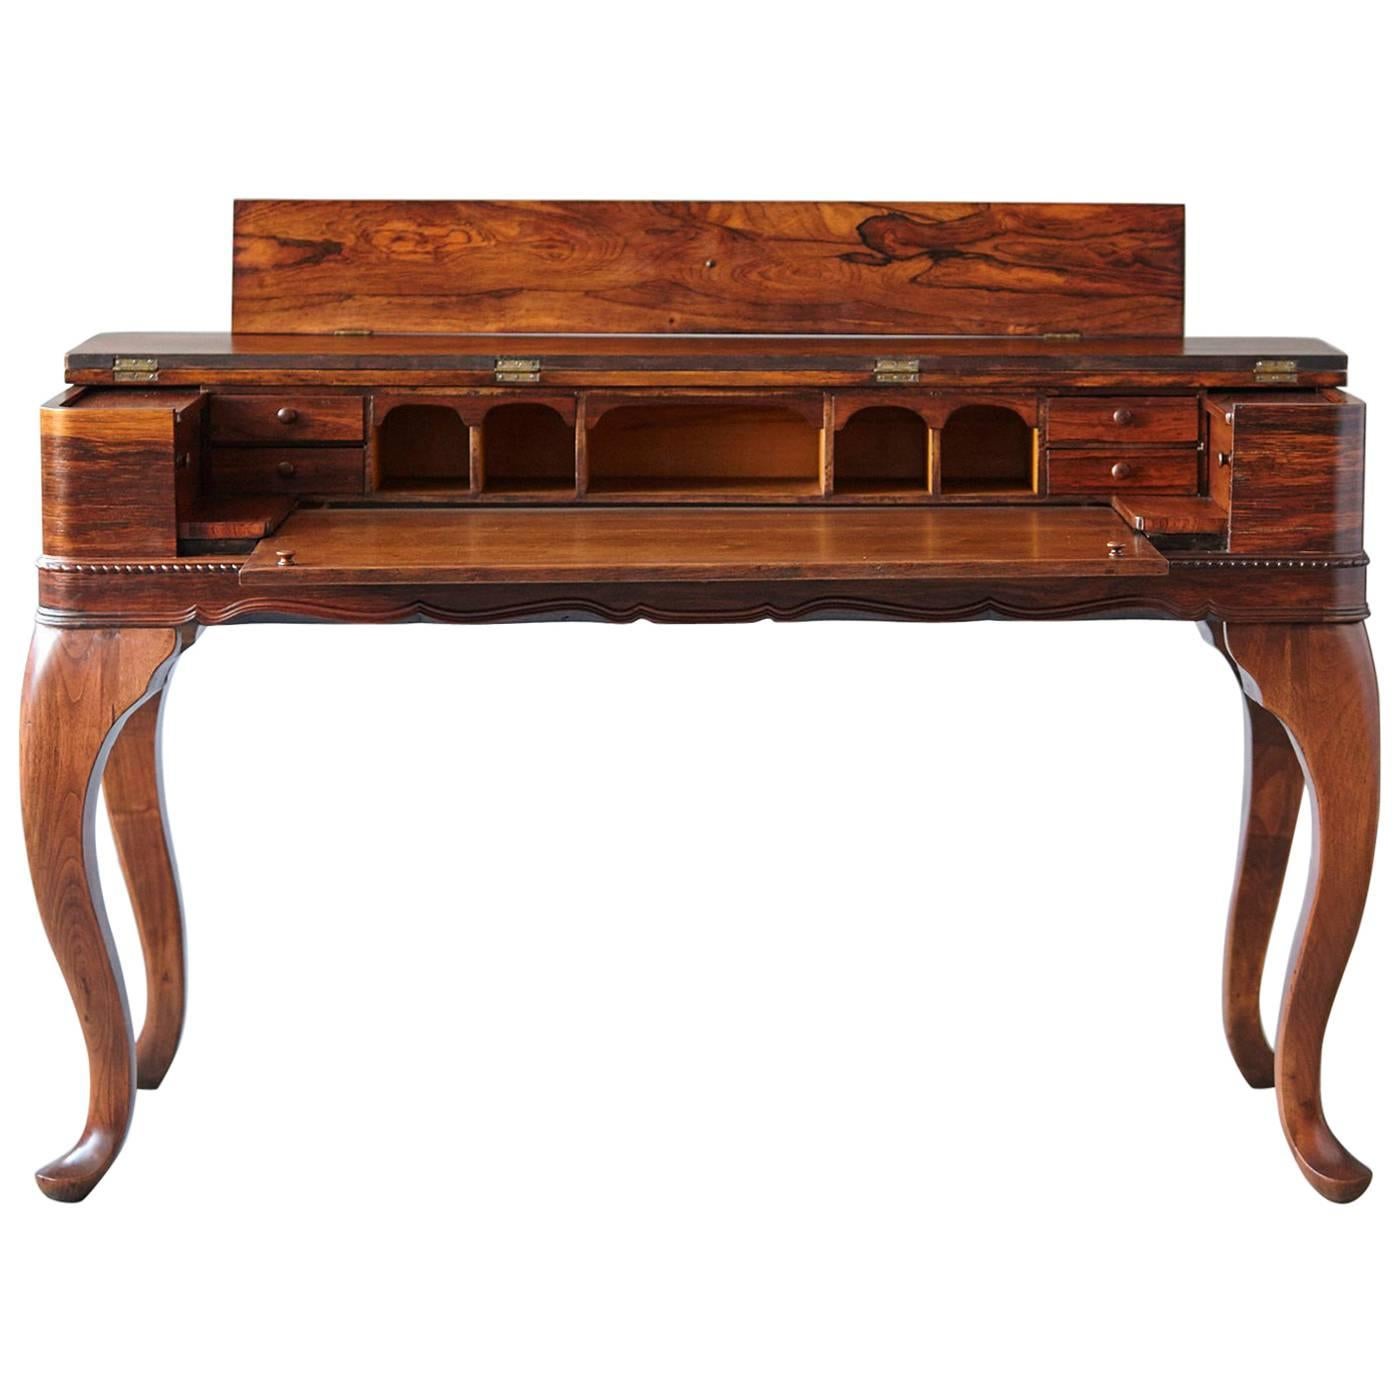 Late 19th Century Queen Anne Style Rosewood Spinet Desk